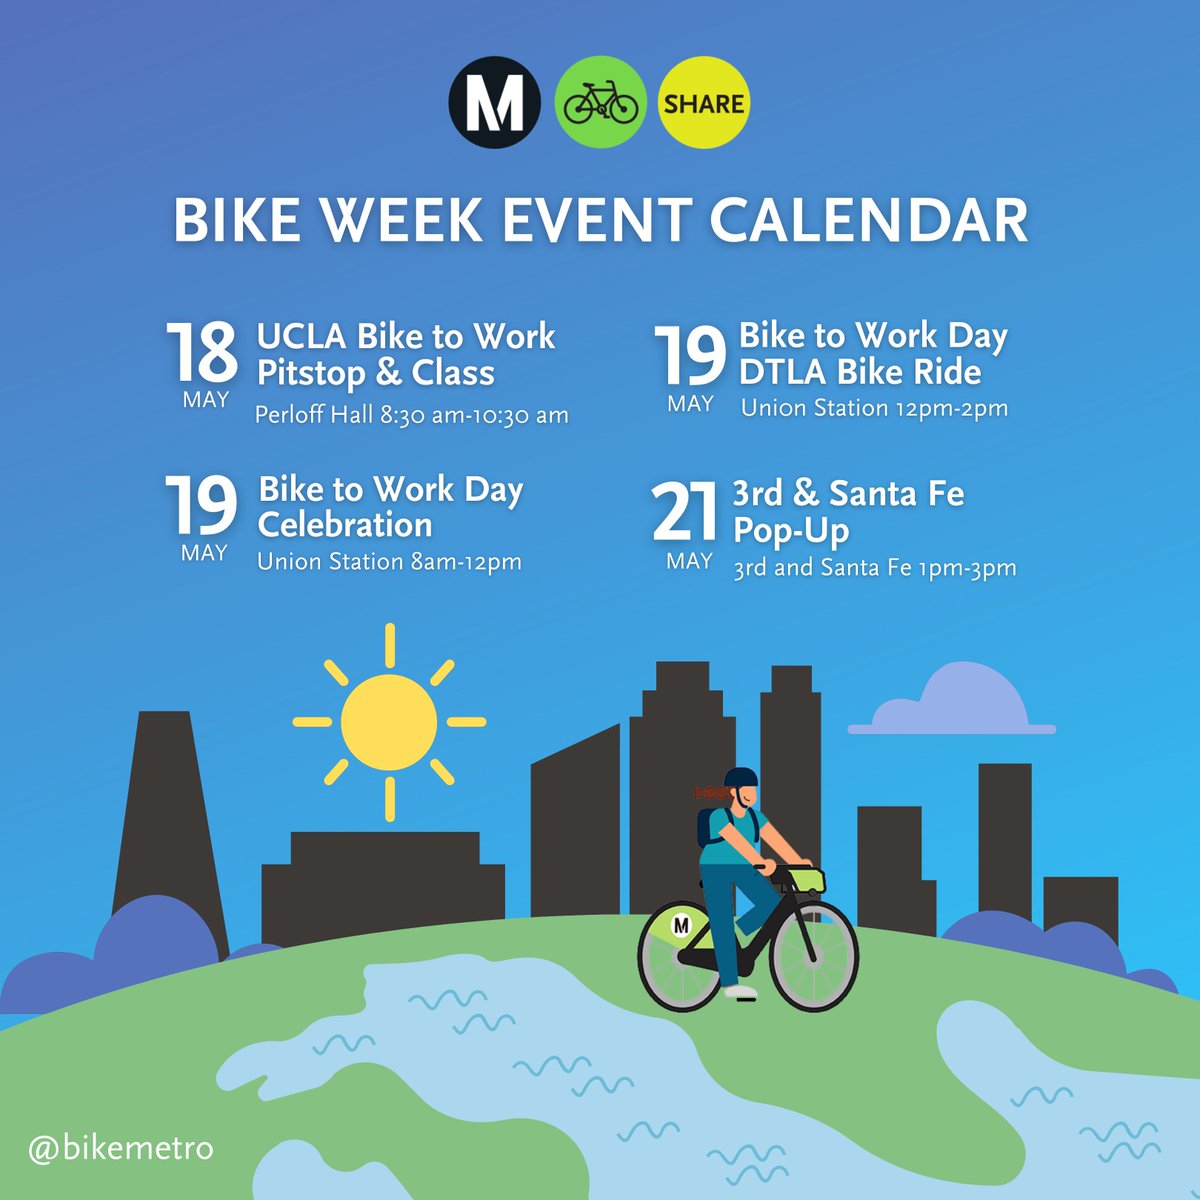 🚲TRAVEL ADVISORY🚲 In honor of Bike to Work Week, which begins Monday (5/16), Metrolink is offering free rides to people who board trains with their bicycles through Friday (5/20). See details: https://t.co/9zpZQ6MXWO

@CountyofLA @LACity @CaltransHQ 